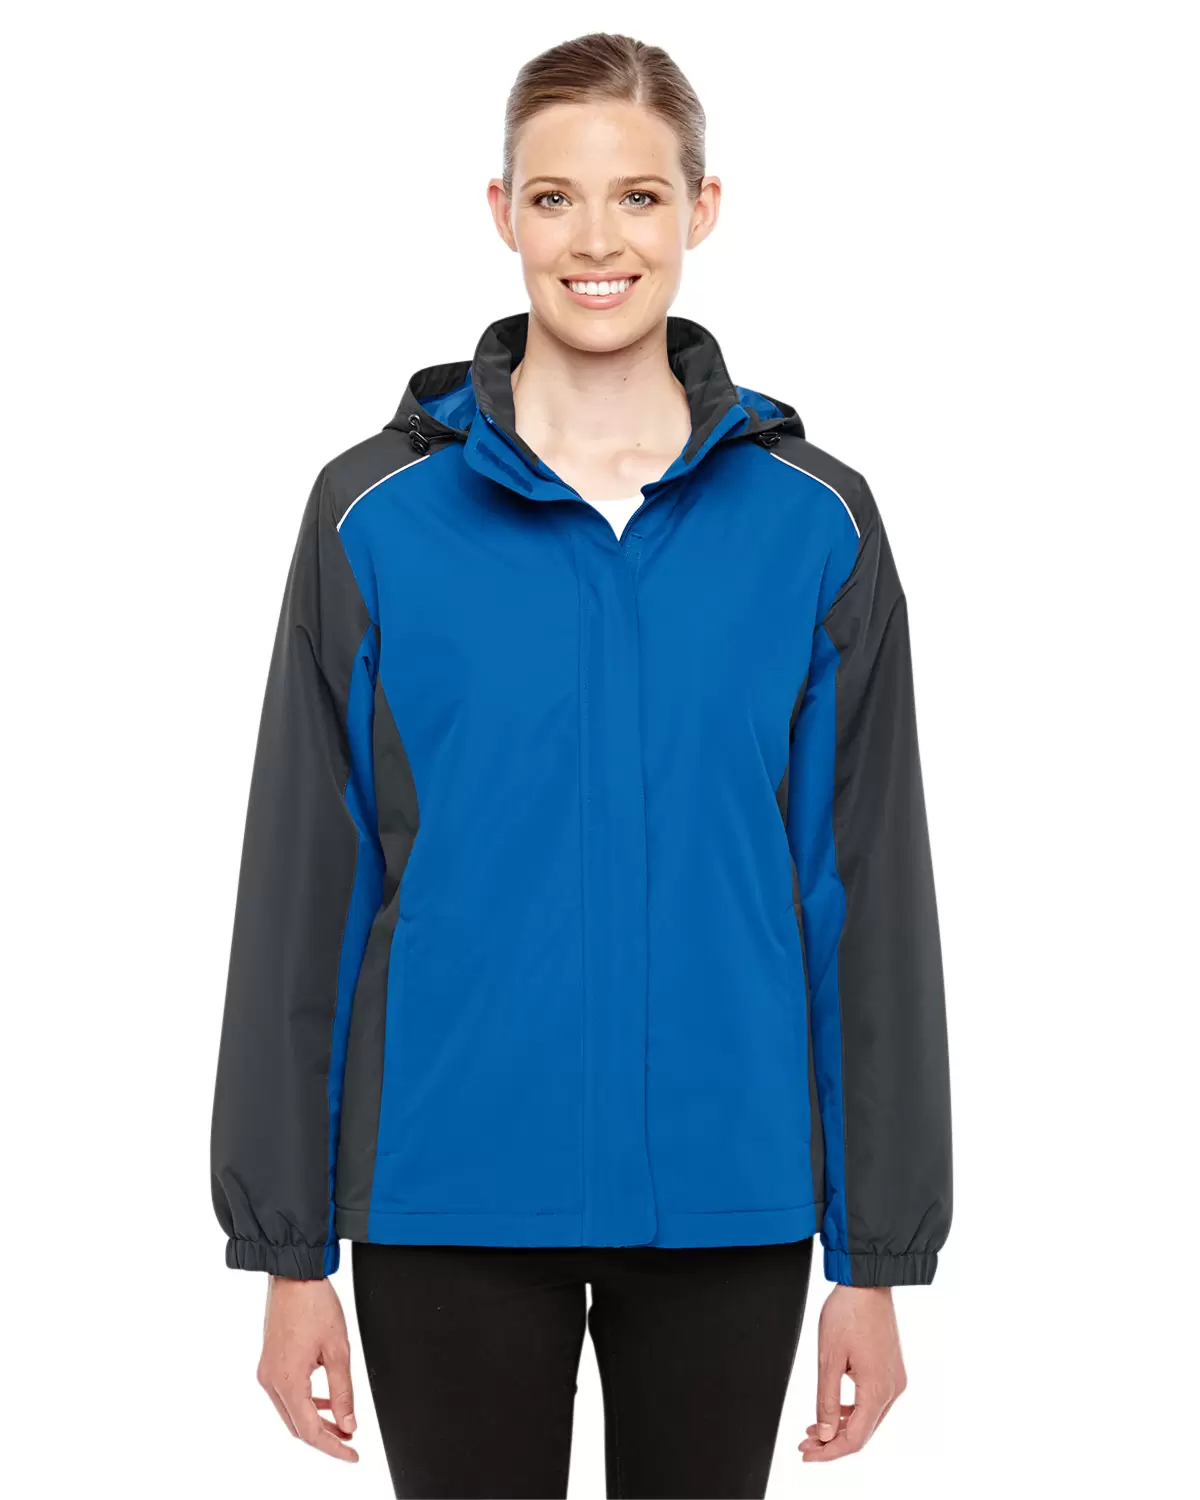 78225 Ash City - Core 365 Ladies' Inspire Colorblock All-Season Jacket -  From $5.76